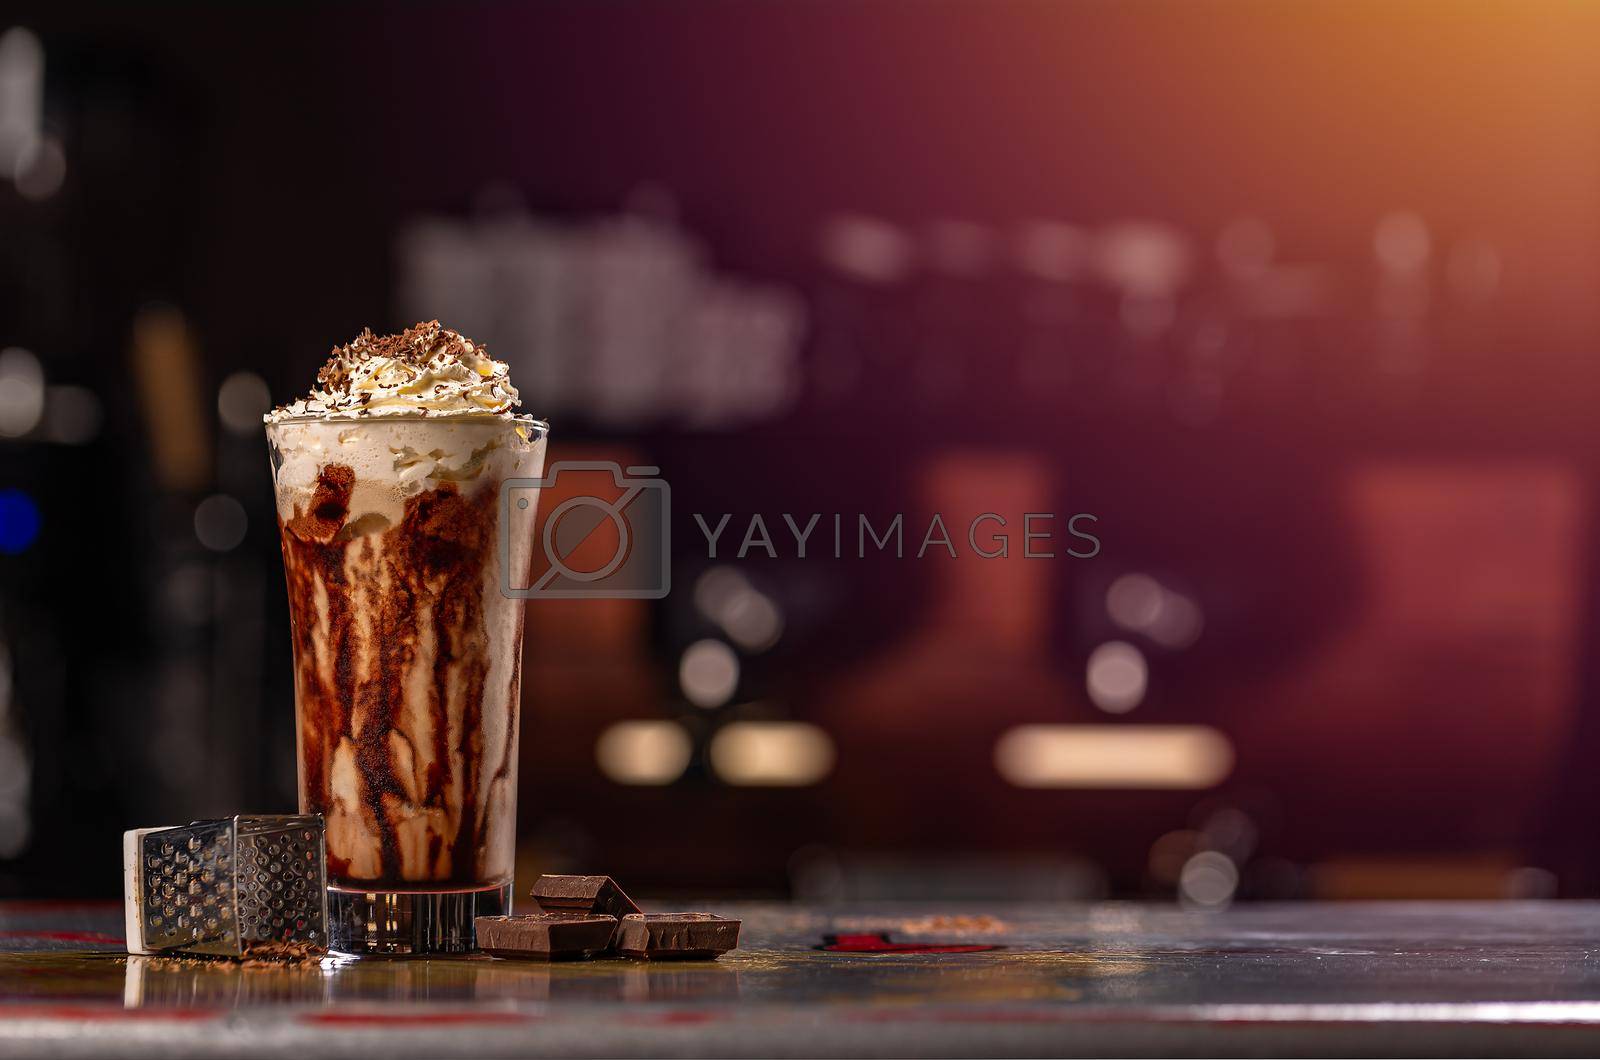 Coffee drink frappe (frappuccino), with whipped cream and chocolate syrup